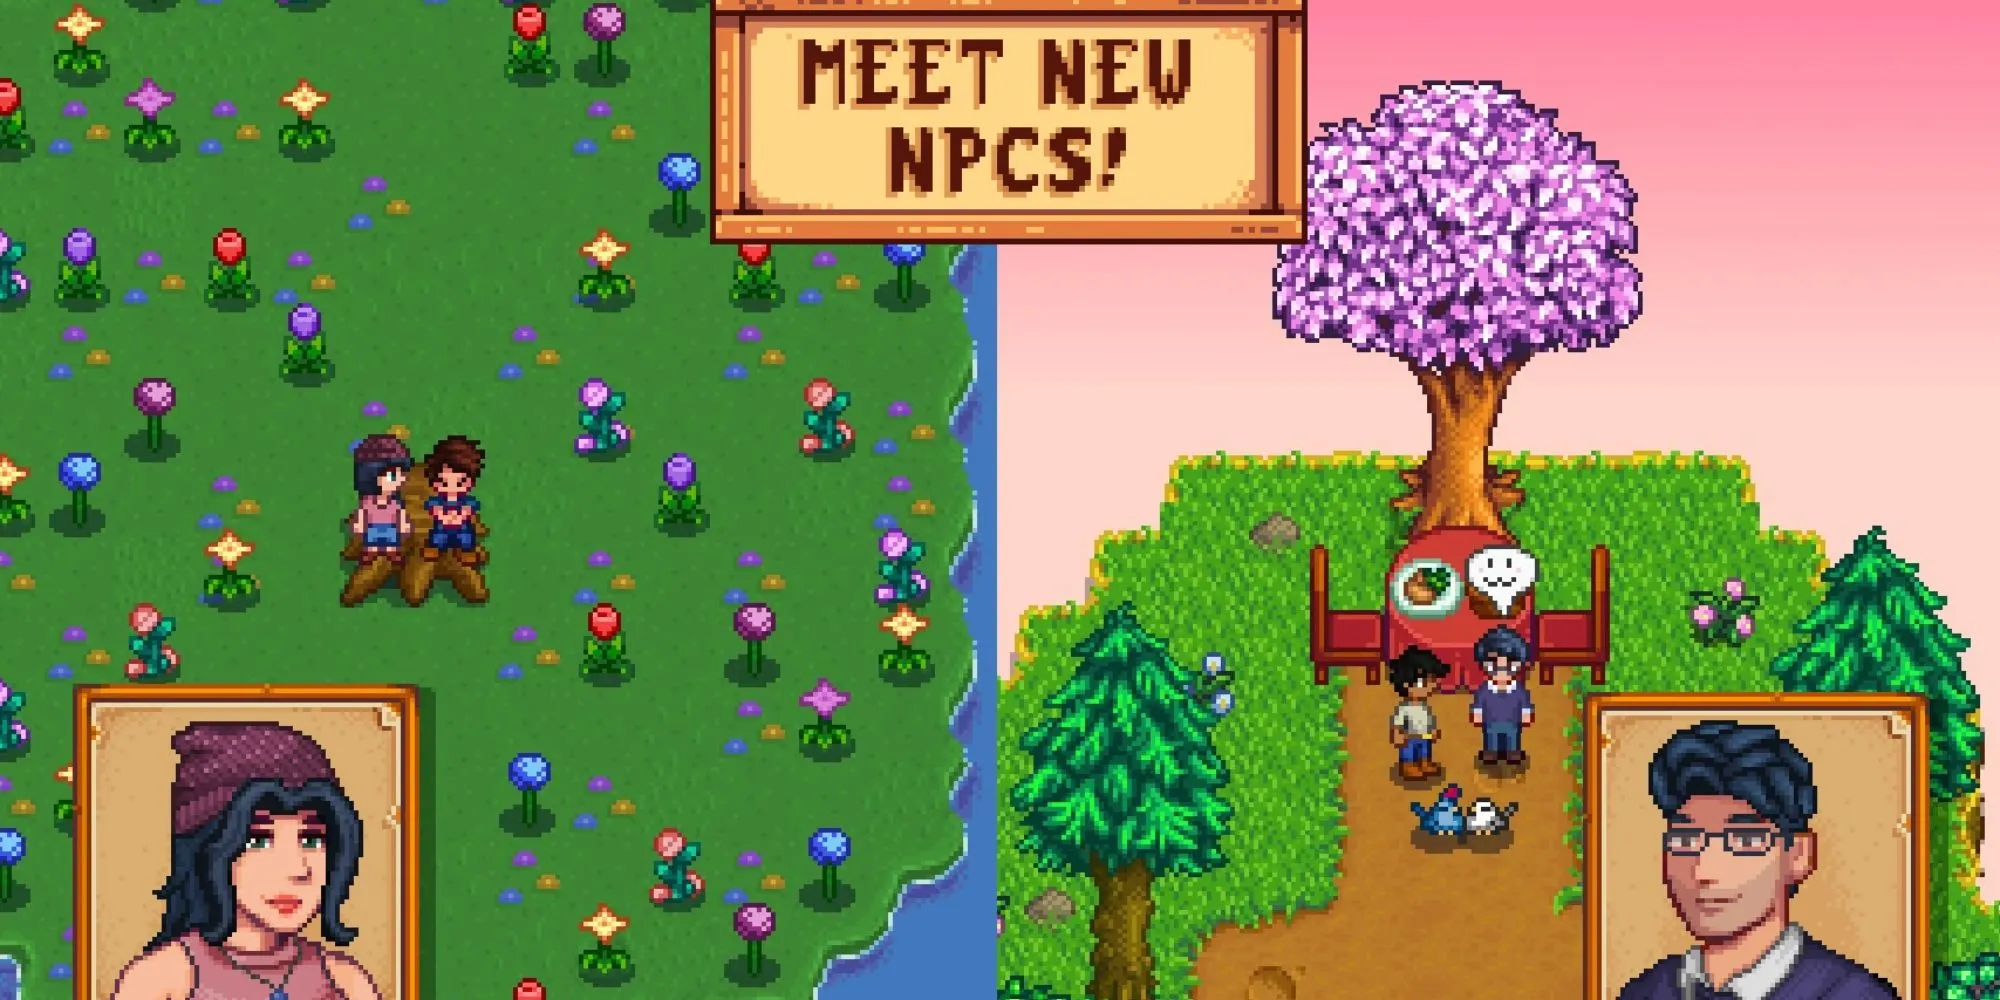 Stardew Valley - Adventurer’s Guild Expanded NPC introduction